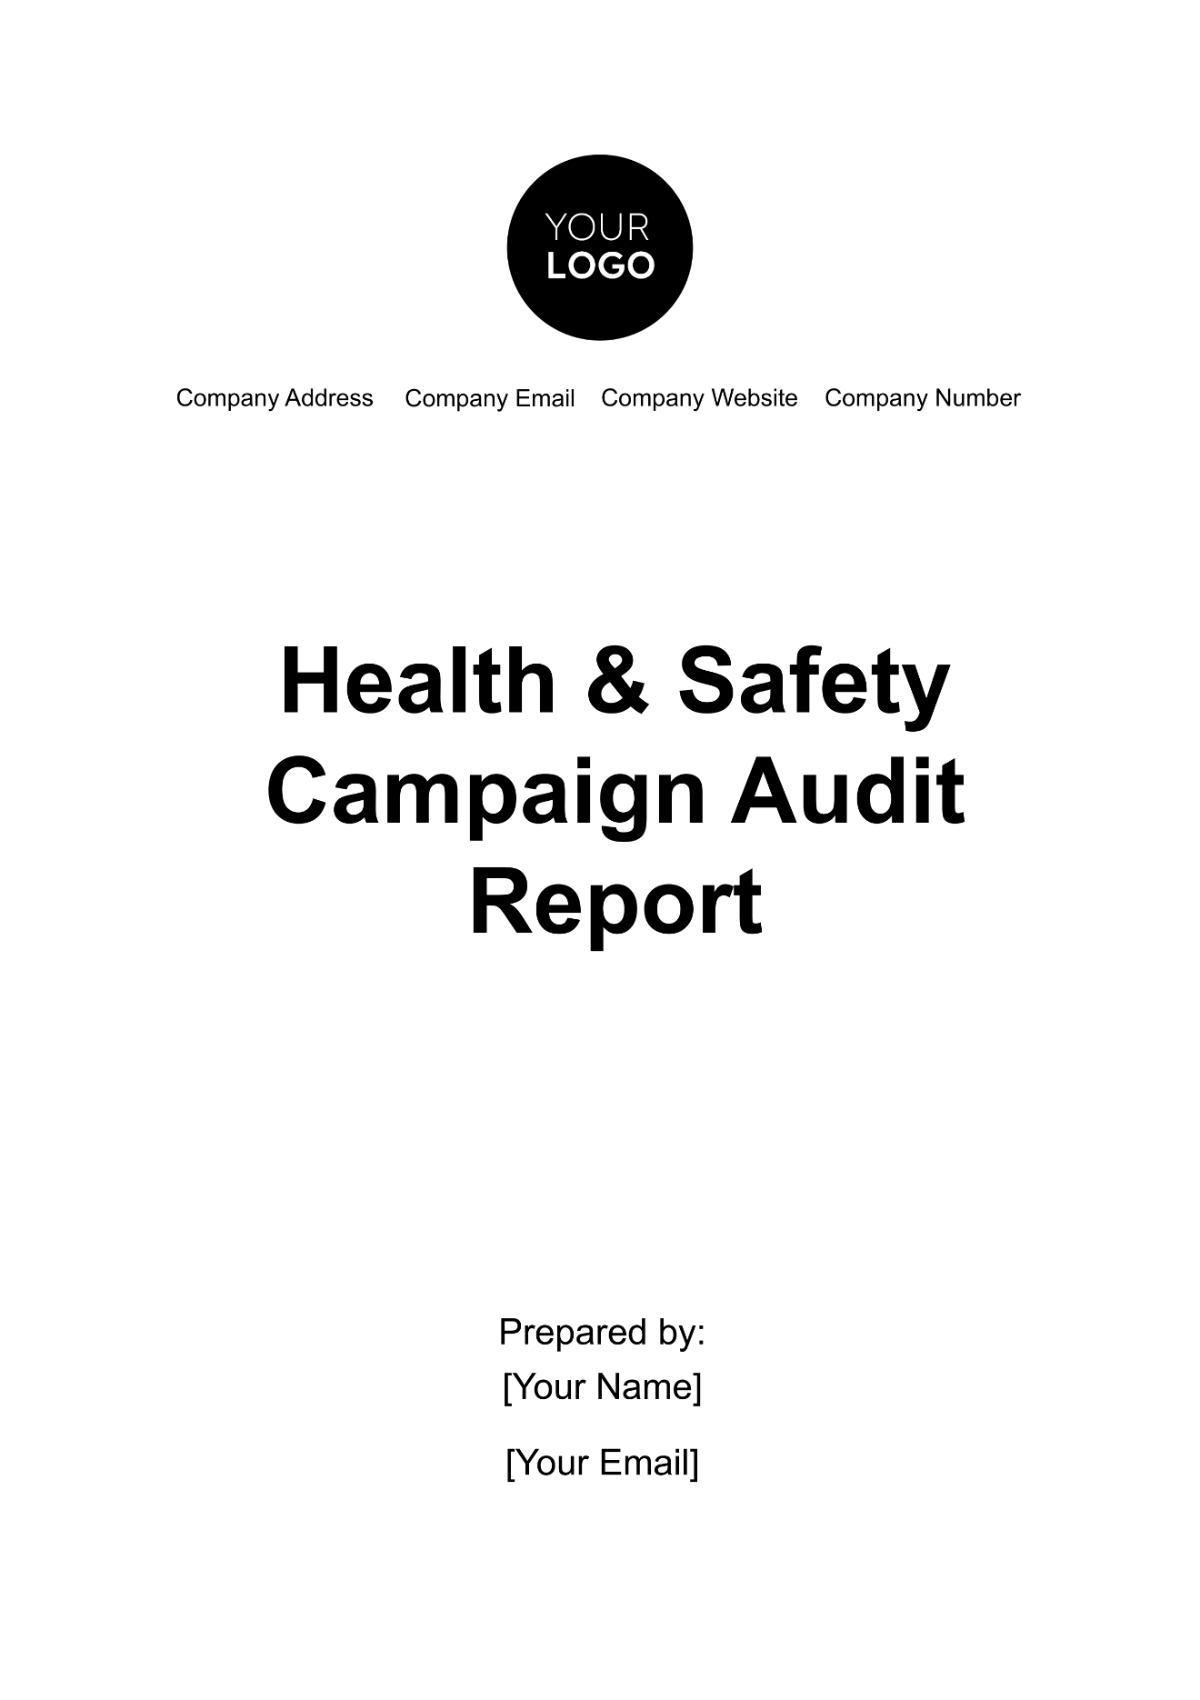 Free Health & Safety Campaign Audit Report Template